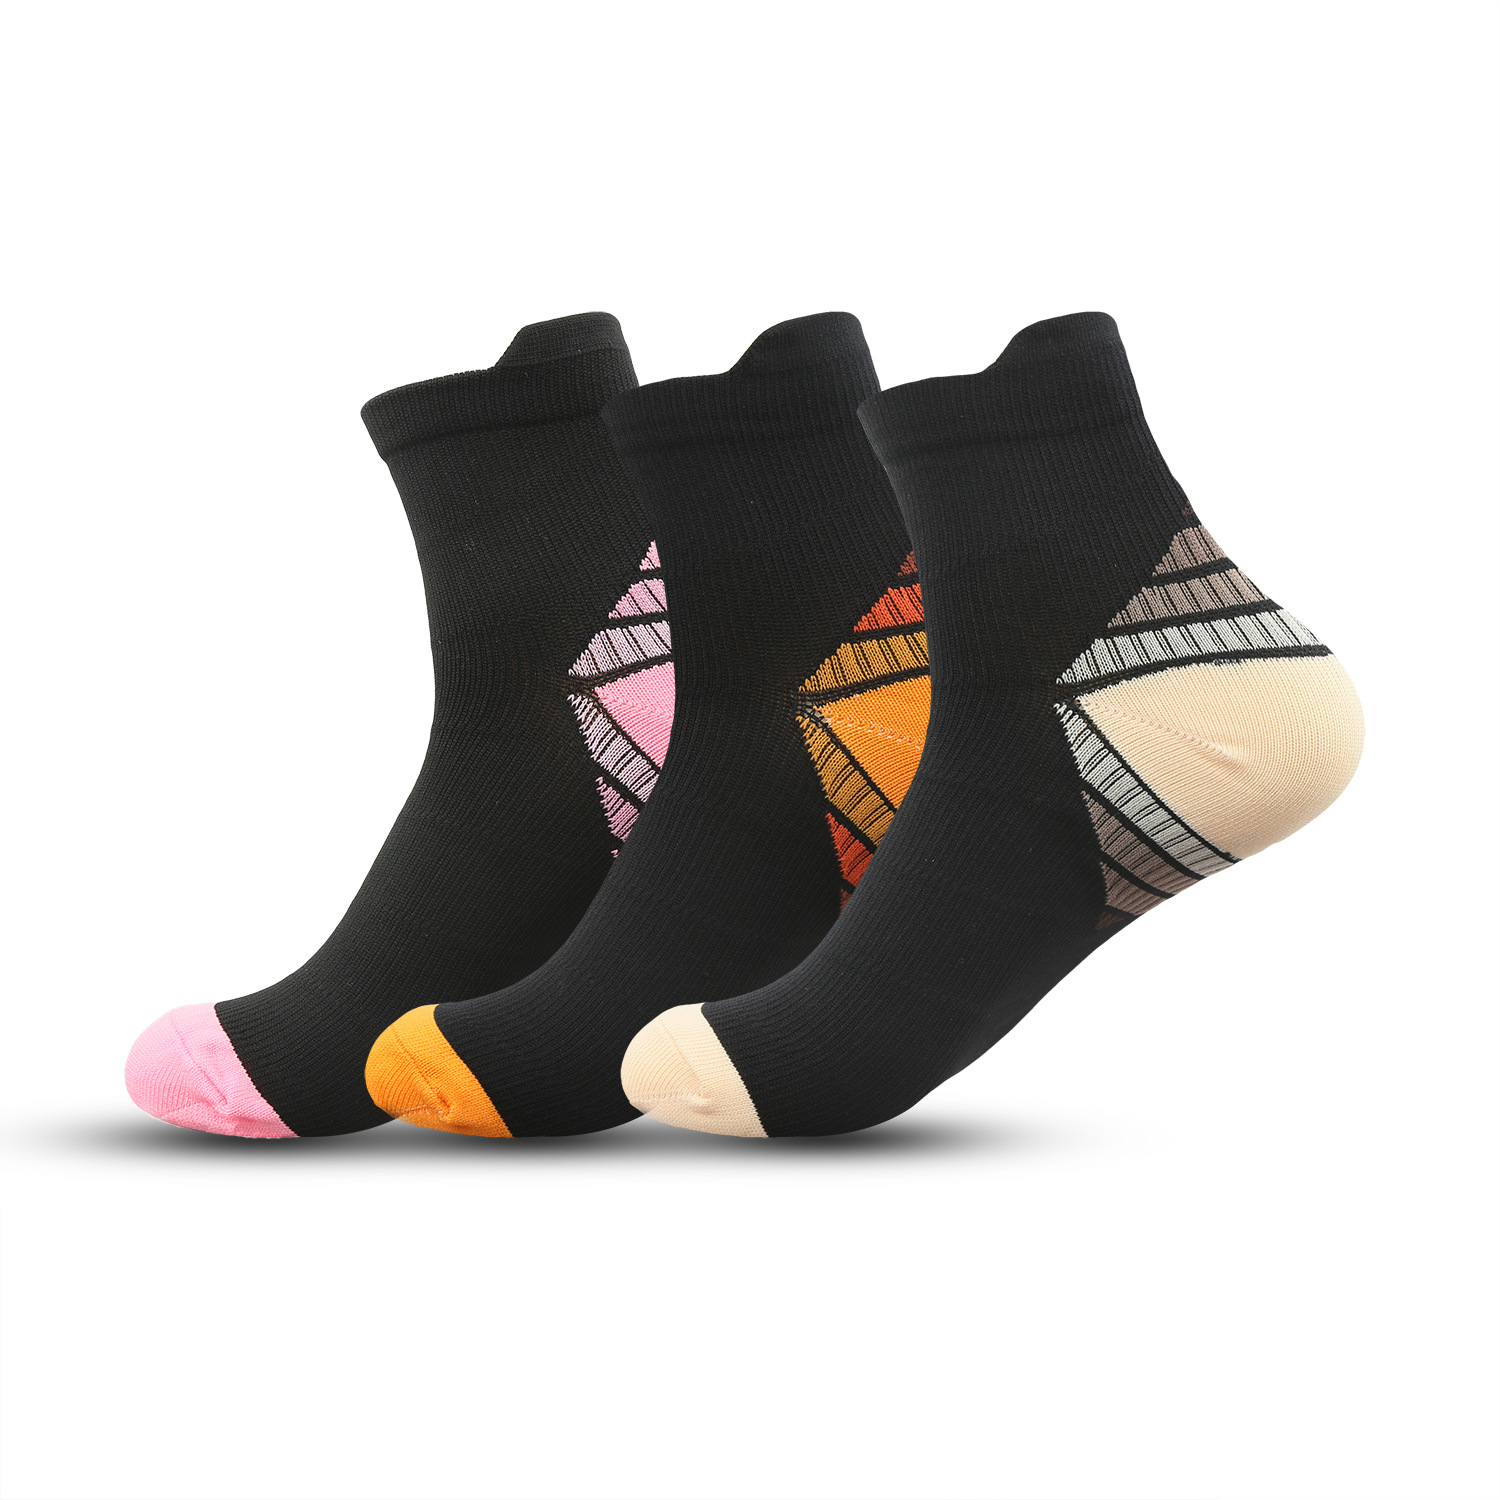 New men's and women's compression socks riding socks compression socks outdoor running plantar fascia breathable elastic Sports